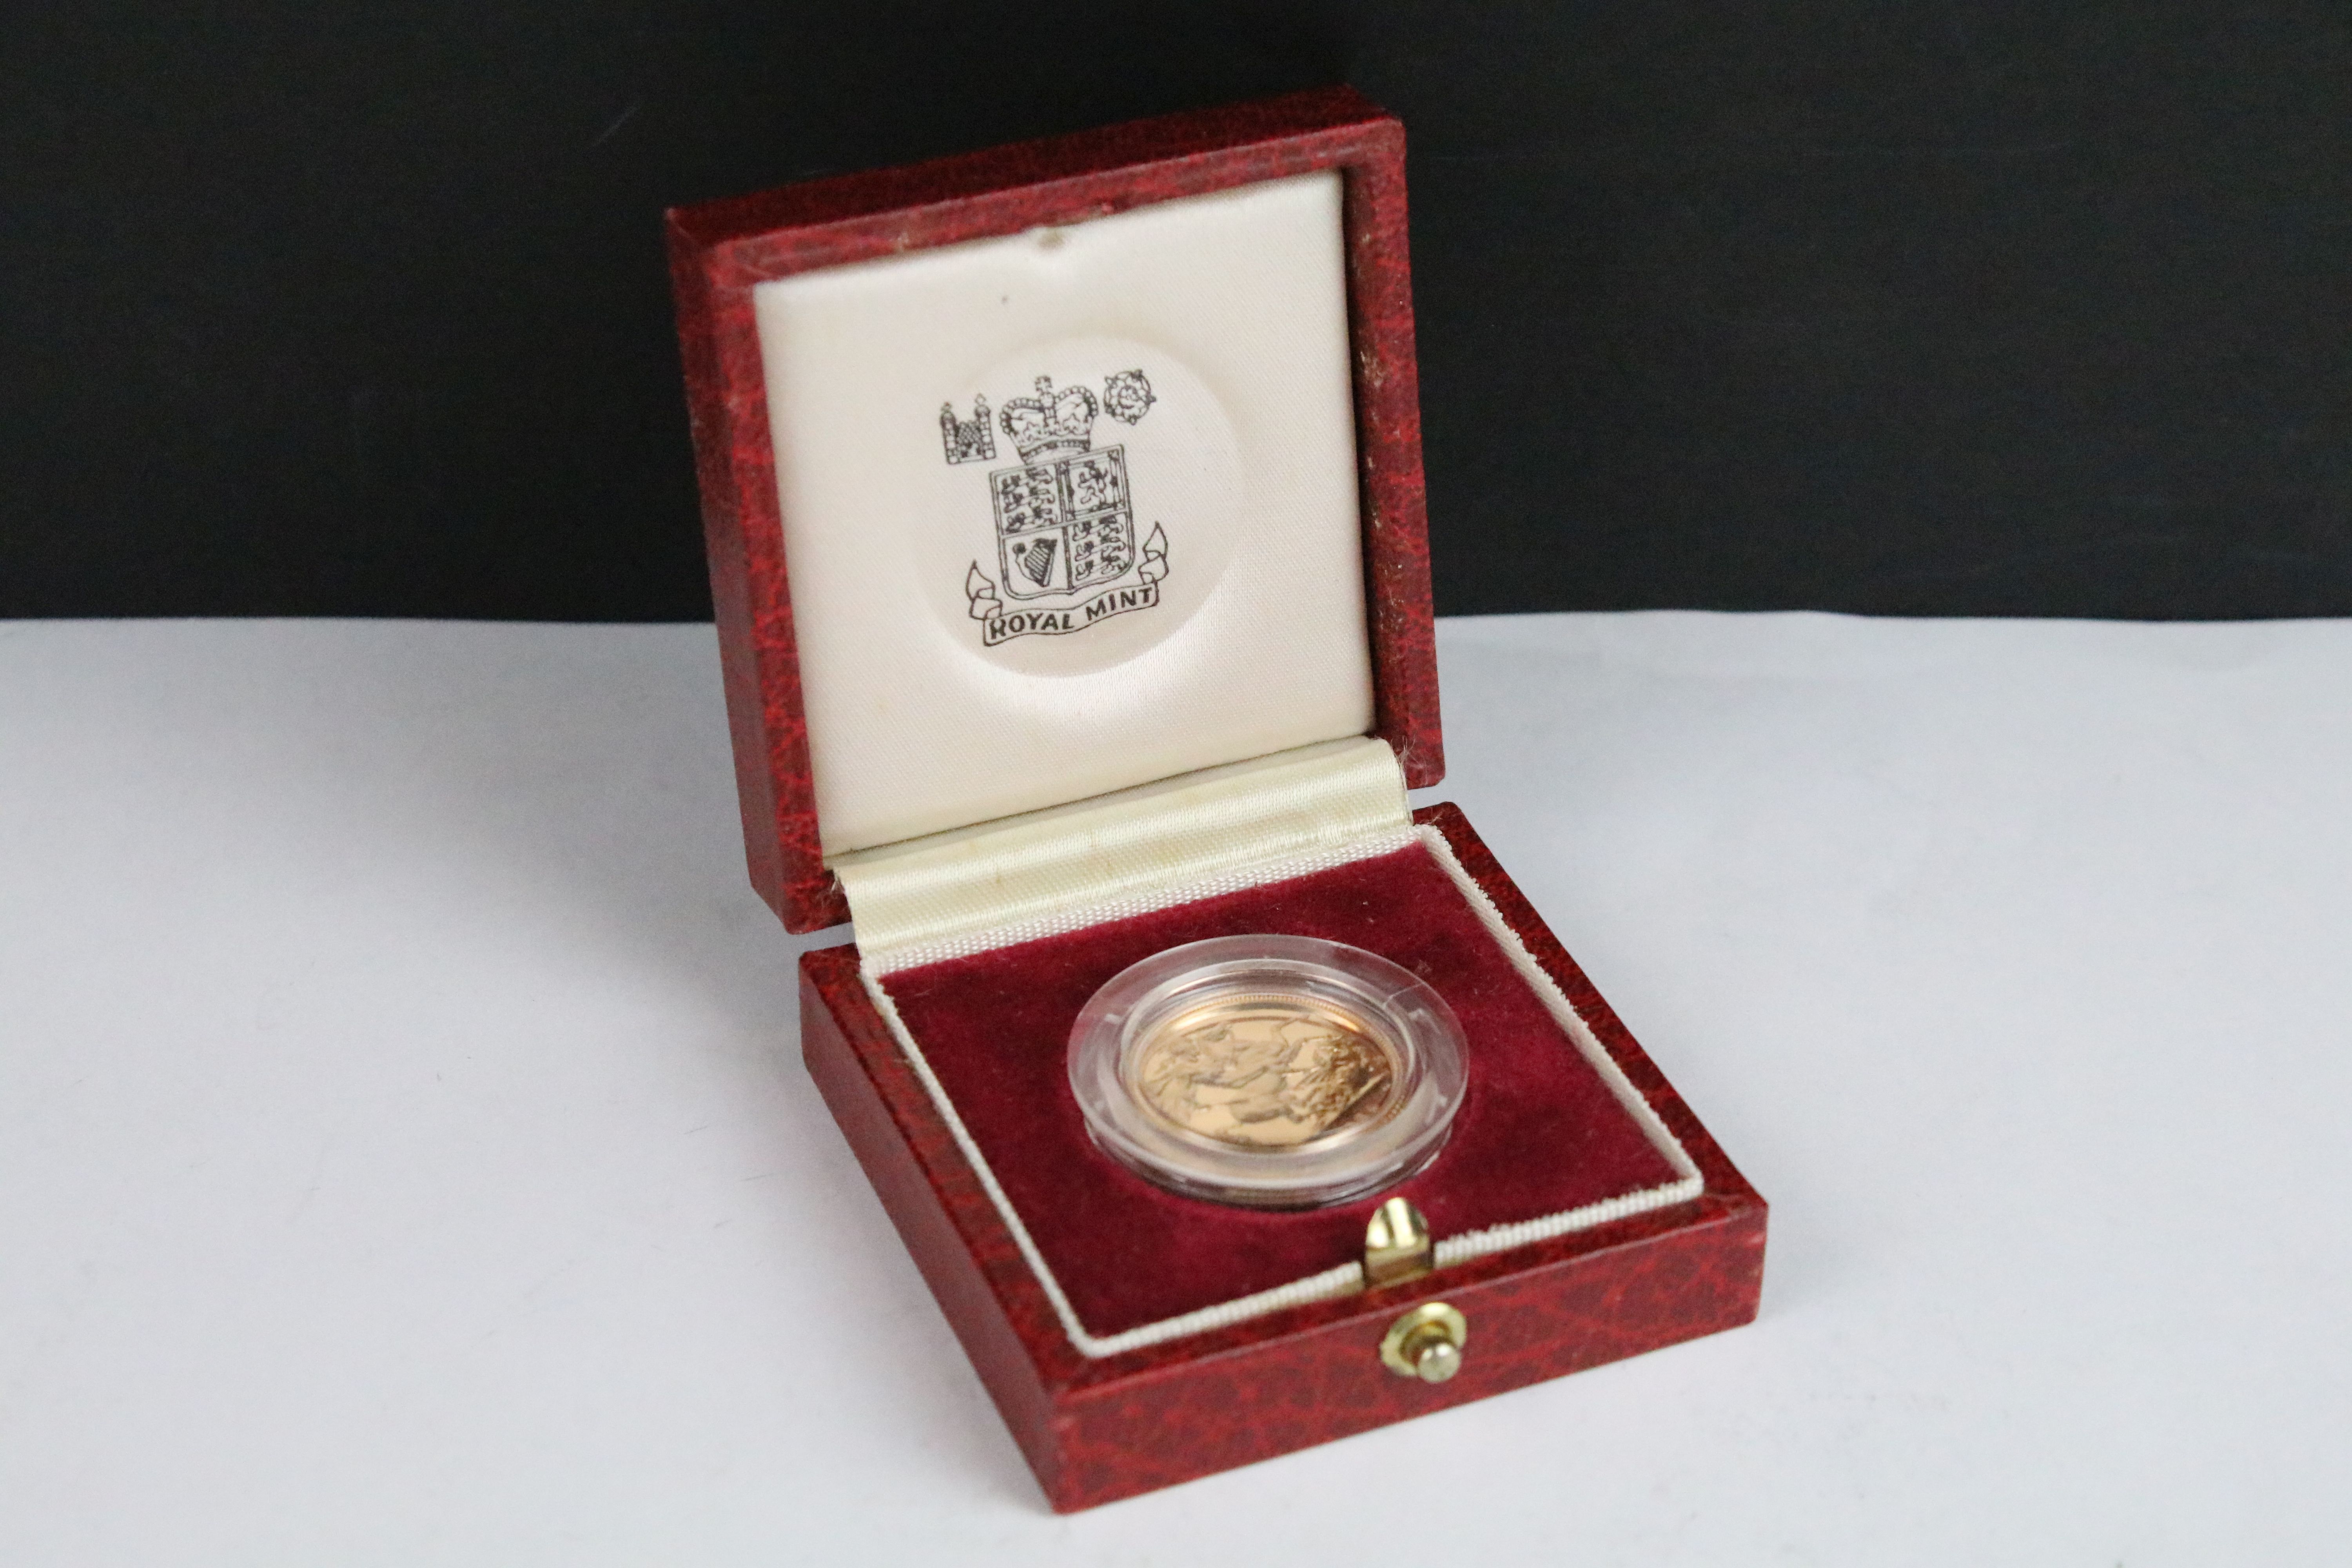 A British Royal Mint Queen Elizabeth II proof 1984 gold full sovereign coin encapsulated within